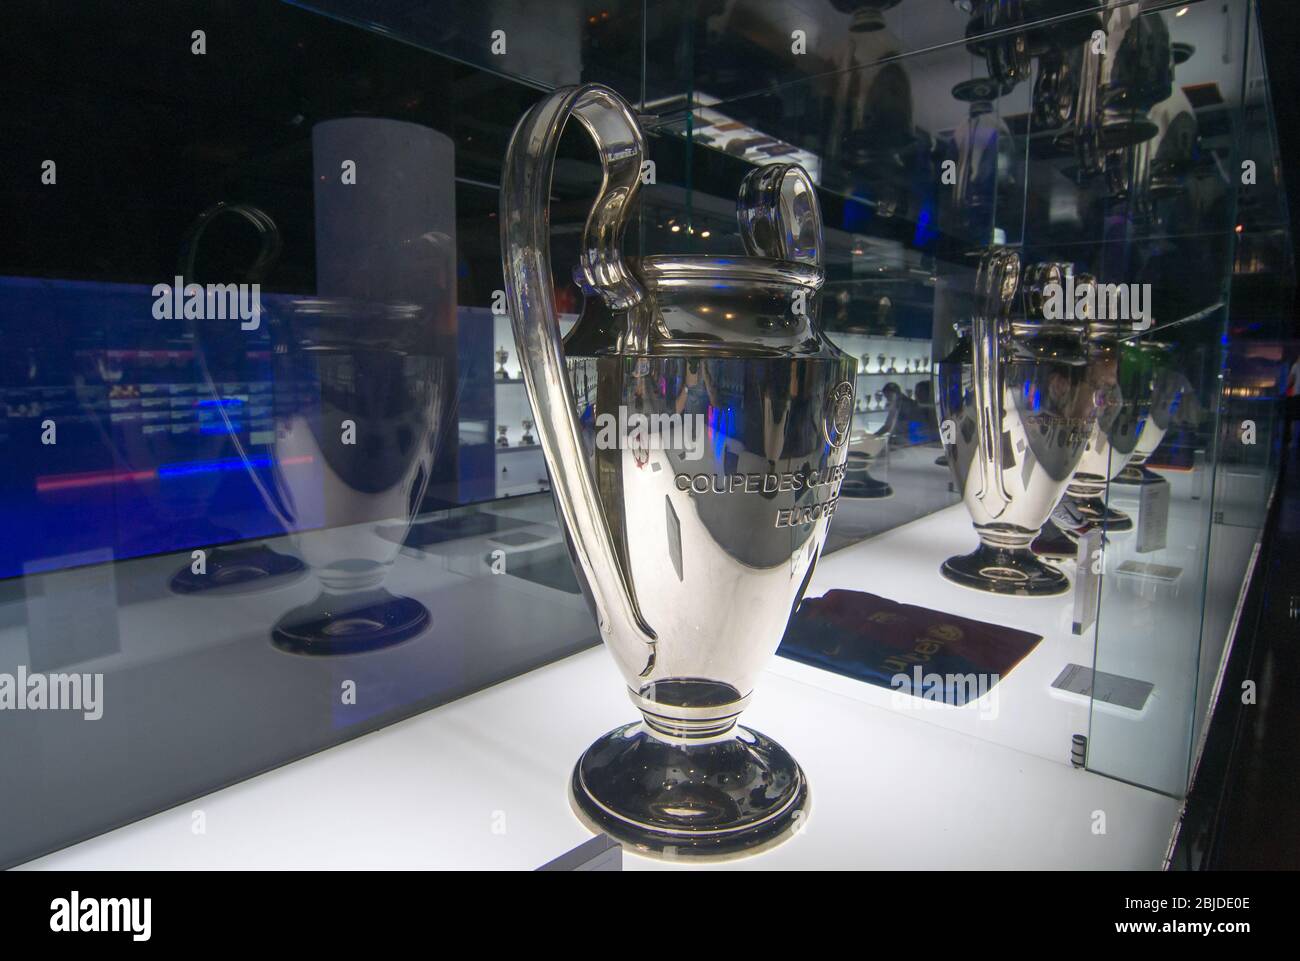 Barcelona, Spain - September 22, 2014: UEFA Champions League Cup in museum. UEFA Cup - trophy awarded annually by UEFA to the football club that wins Stock Photo